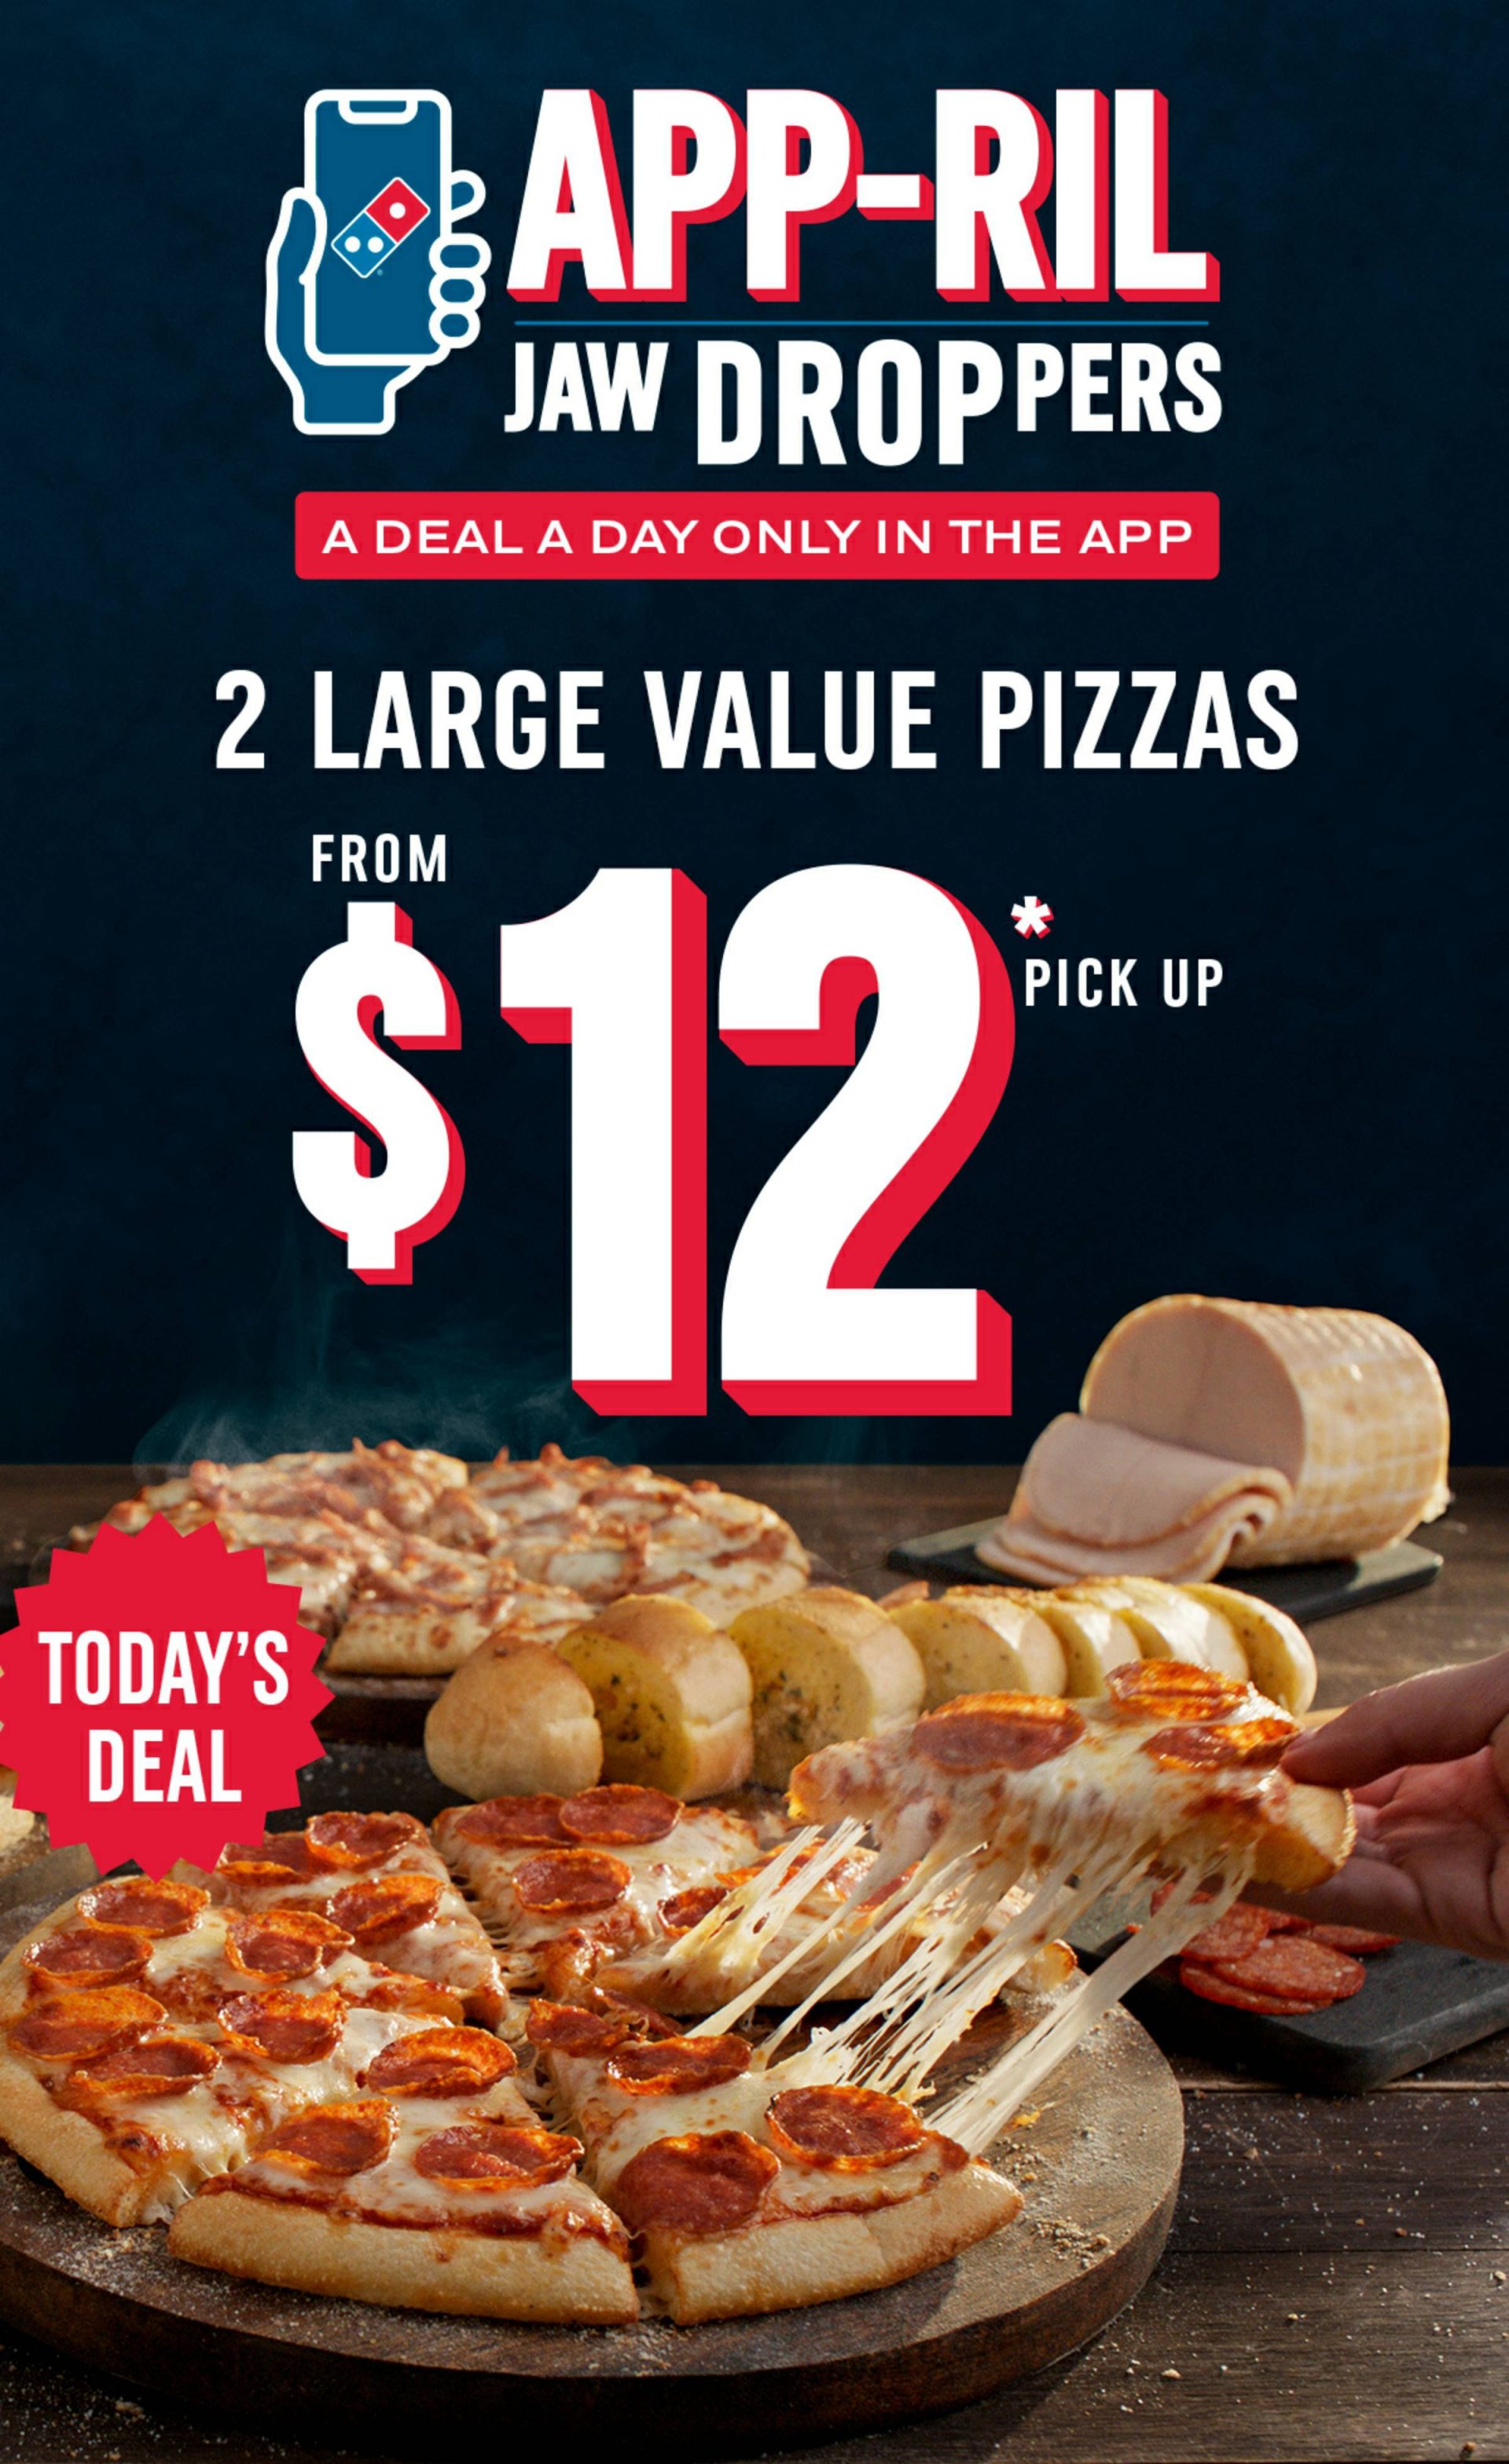 DEAL Domino's 2 Large Value Pizzas for 12 via Domino's App (18